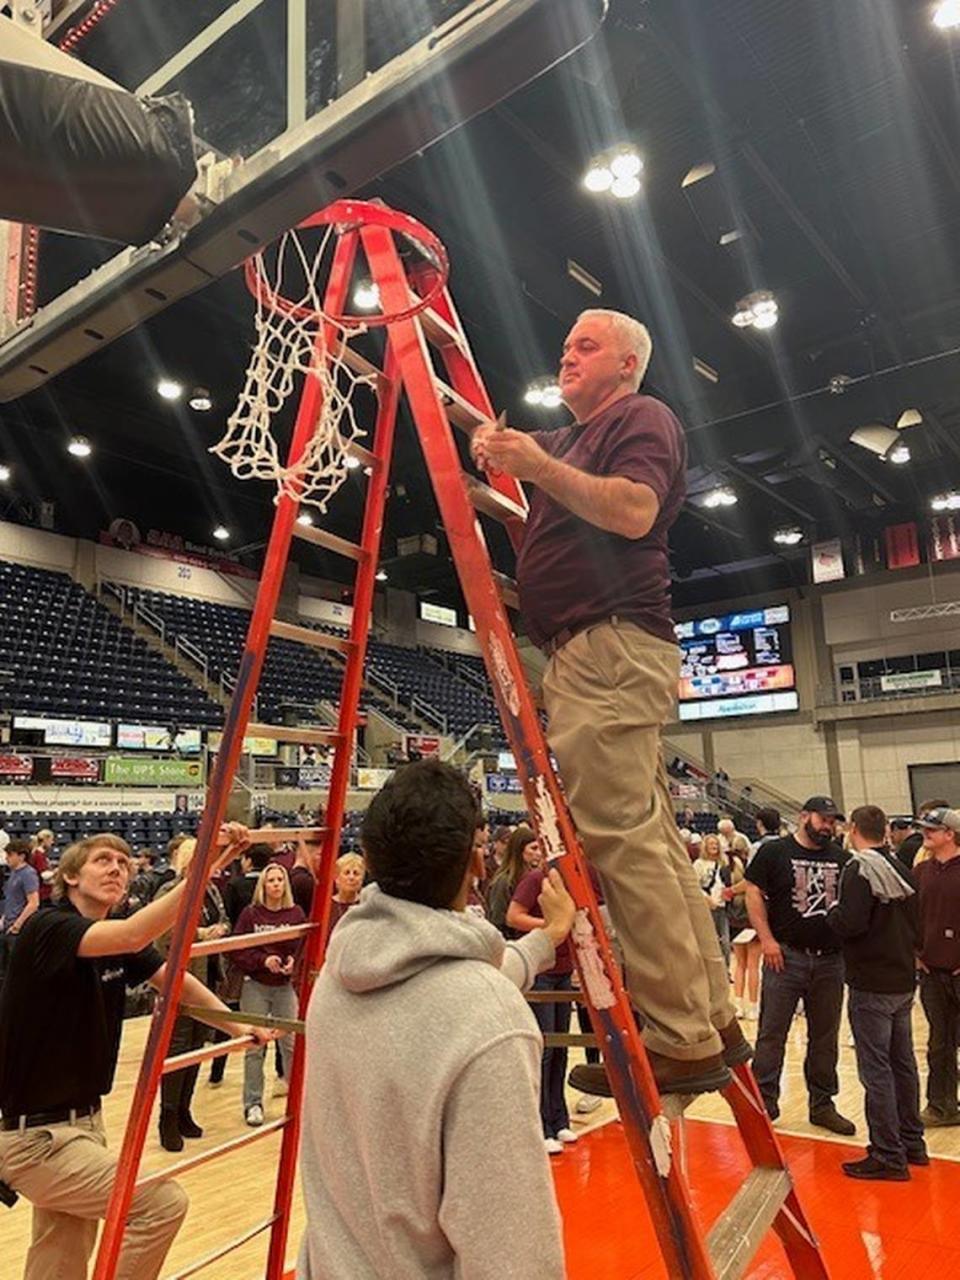 Magoffin County coach Scott Castle cut down the net after leading the Hornets to their first boys basketball 15th Region championship ever with a 67-57 win over Martin County on March 11. In Wednesday’s Sweet 16 opener, Magoffin County will face a Perry County Central team whose best player, Carter Castle, is the son of Scott Castle’s twin brother, Jeff.